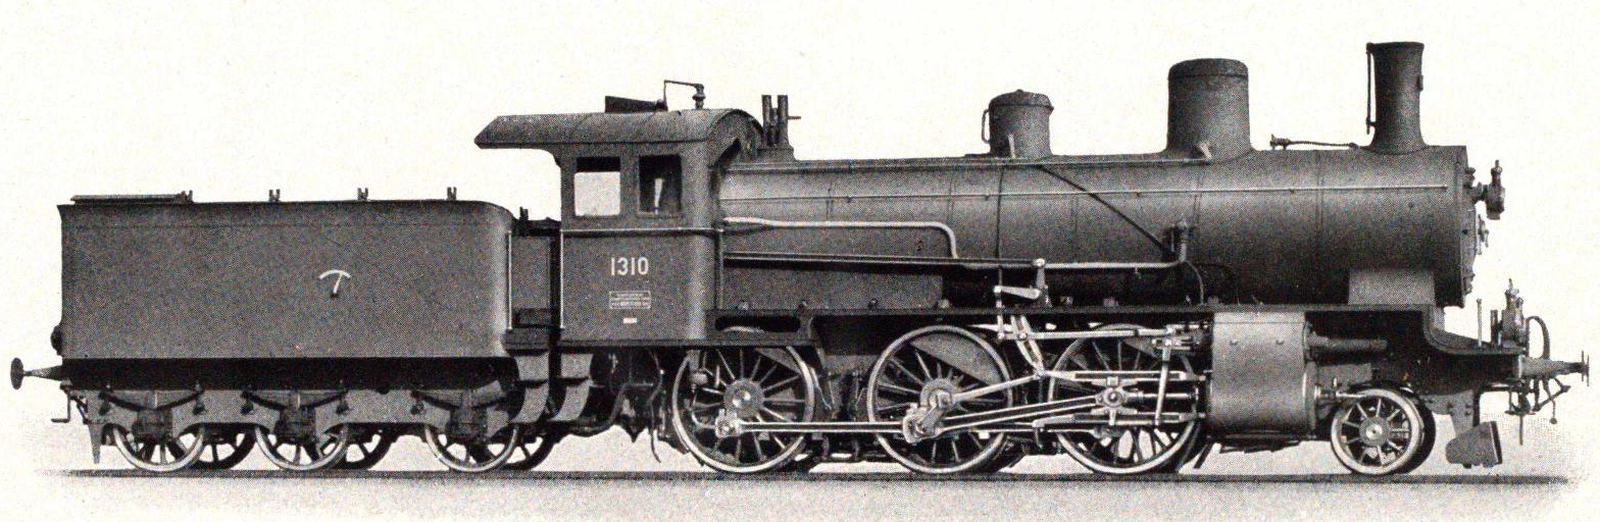 No. 1310 in the SLM type sheet